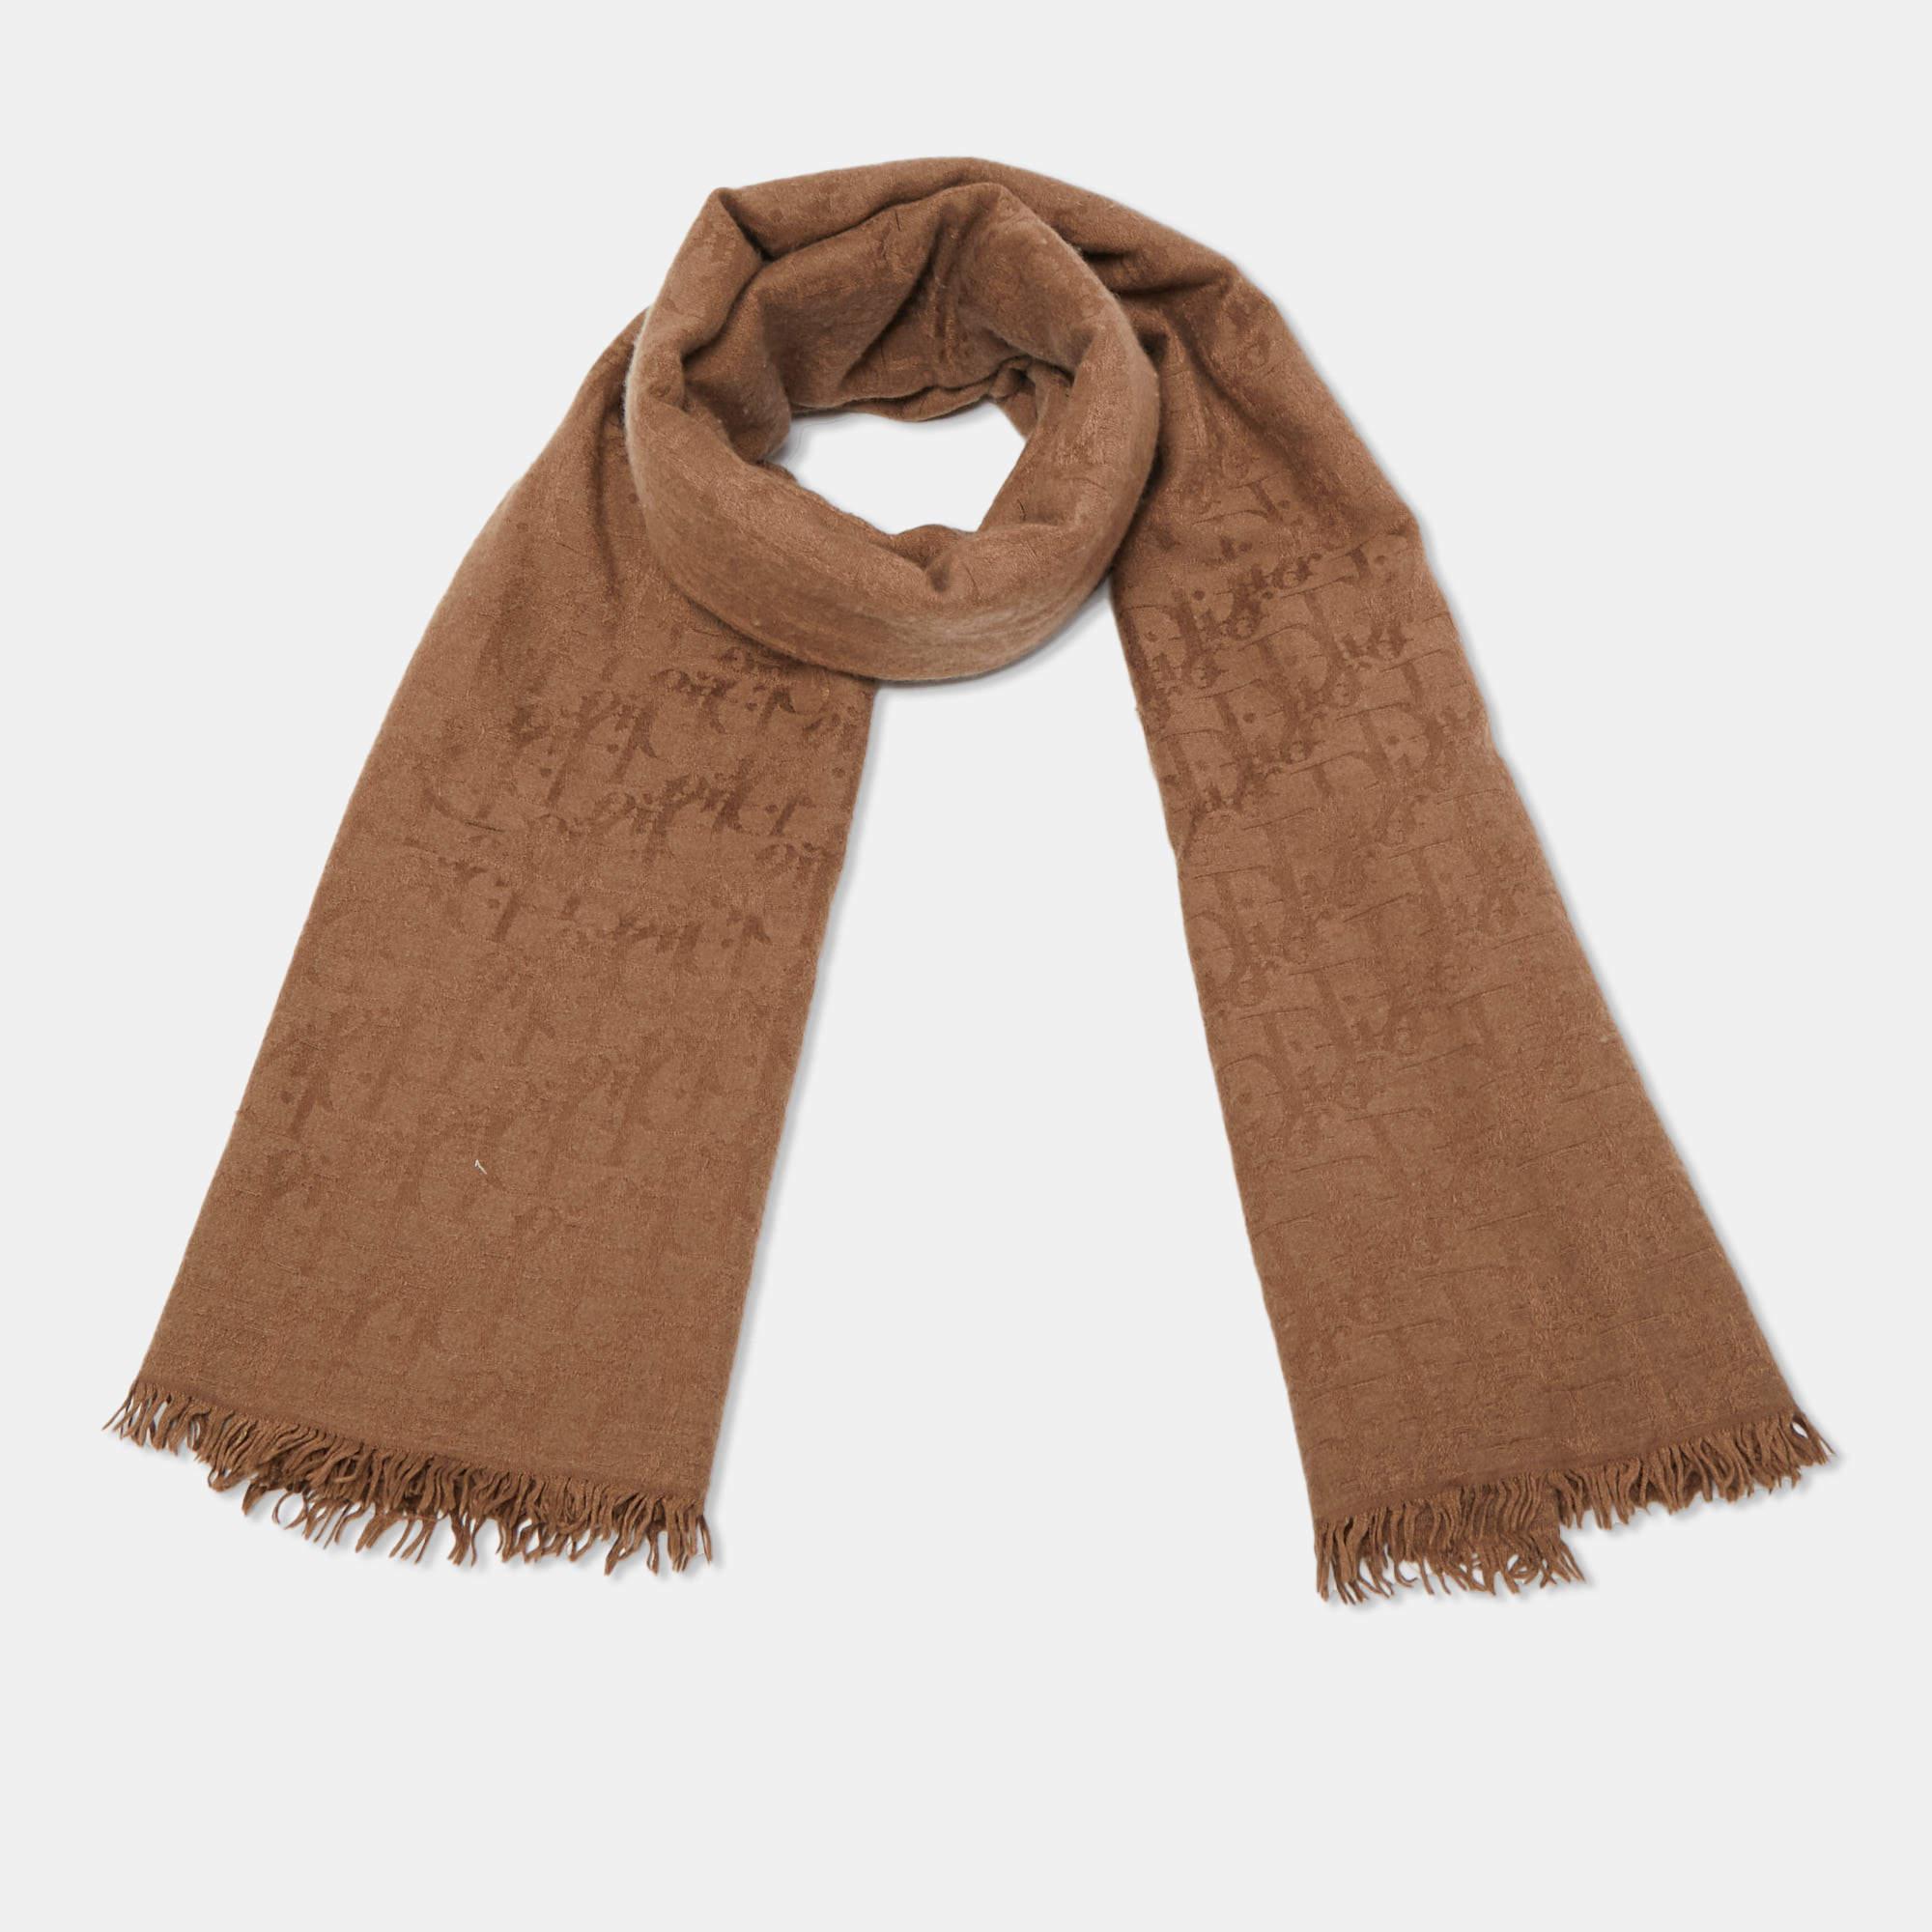 Adorn this Christian Dior scarf with formal or casual attire for a distinctively fashionable look. Made out of cashmere and silk, this scarf, with its subtle brown hue and the signature Cannage motif, is the perfect addition to your wardrobe.

